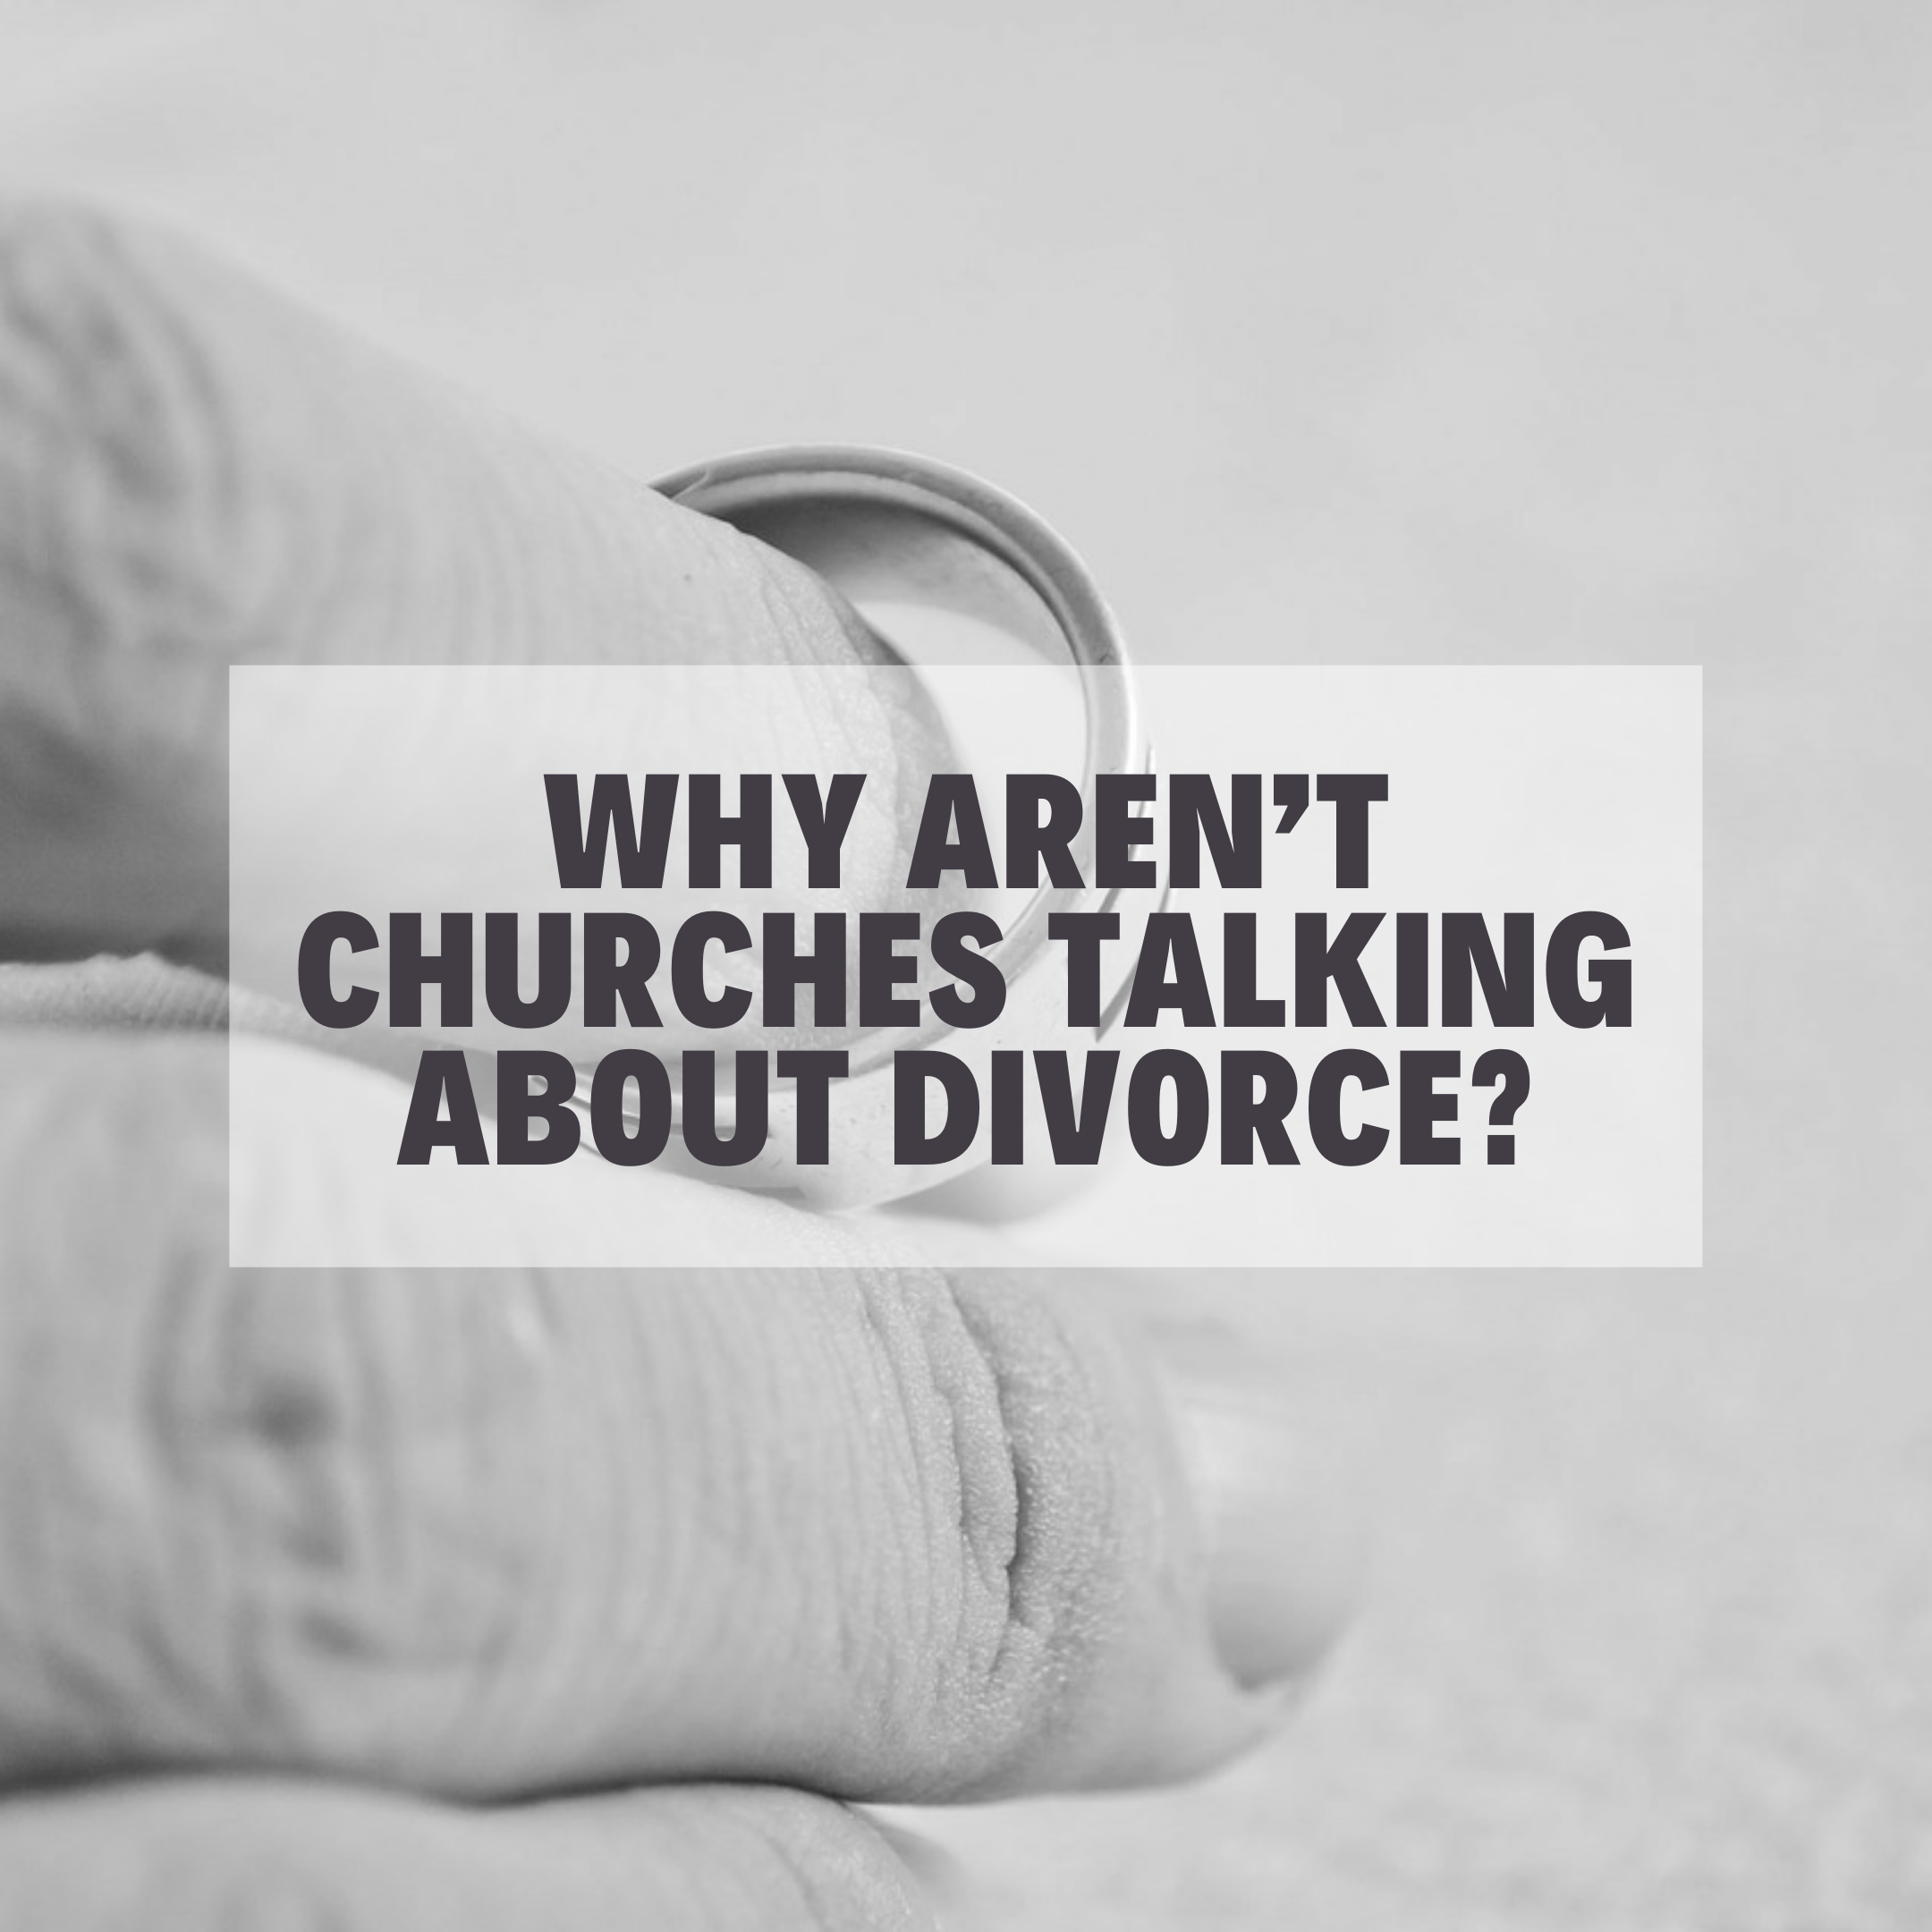 holding ring in hand but not wearing it with text "why aren't churches talking about divorce"